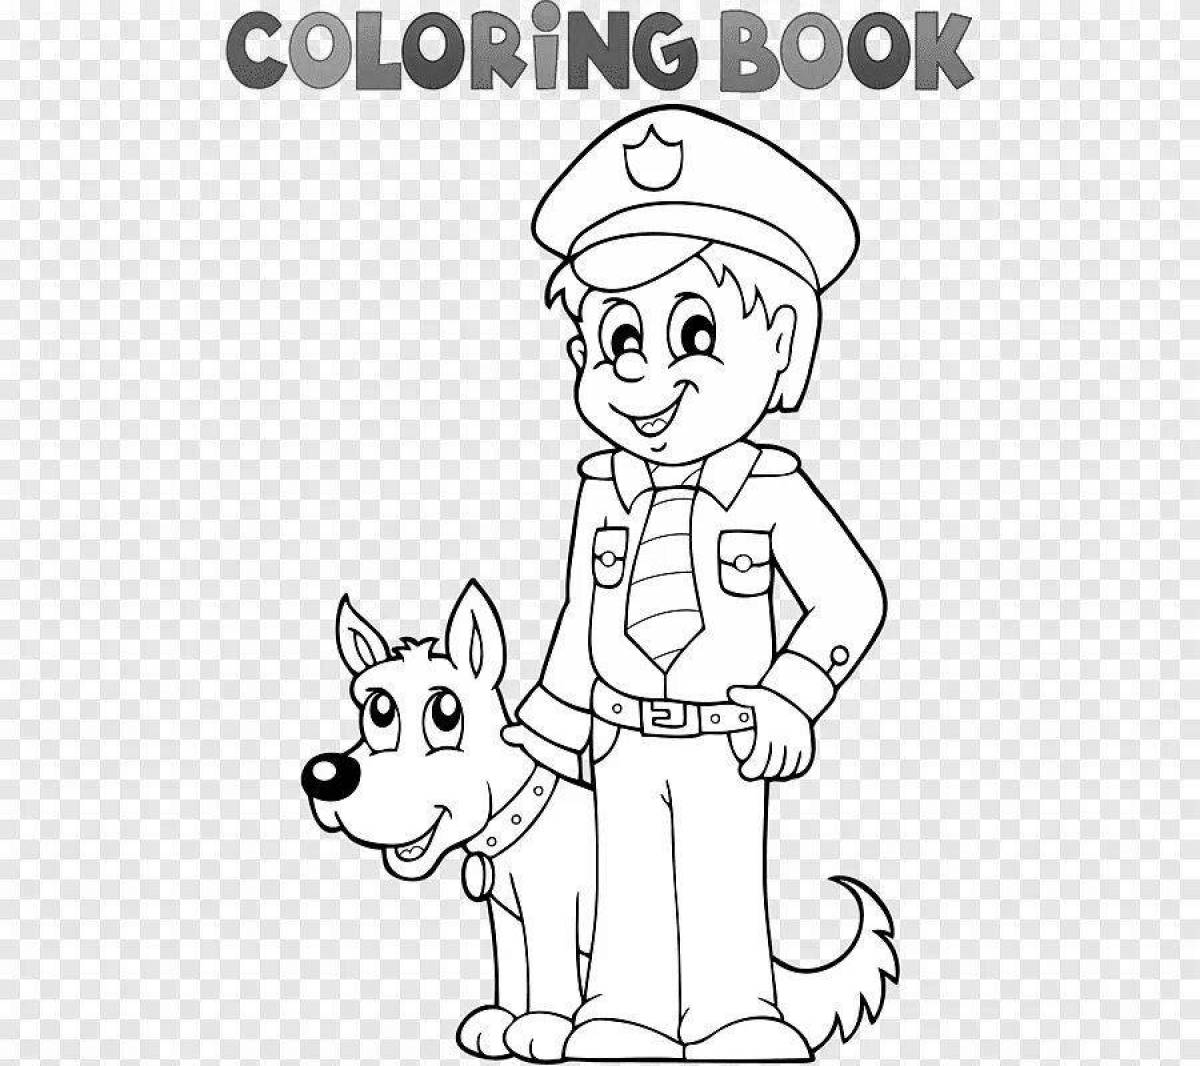 Coloring page cheeky police dog